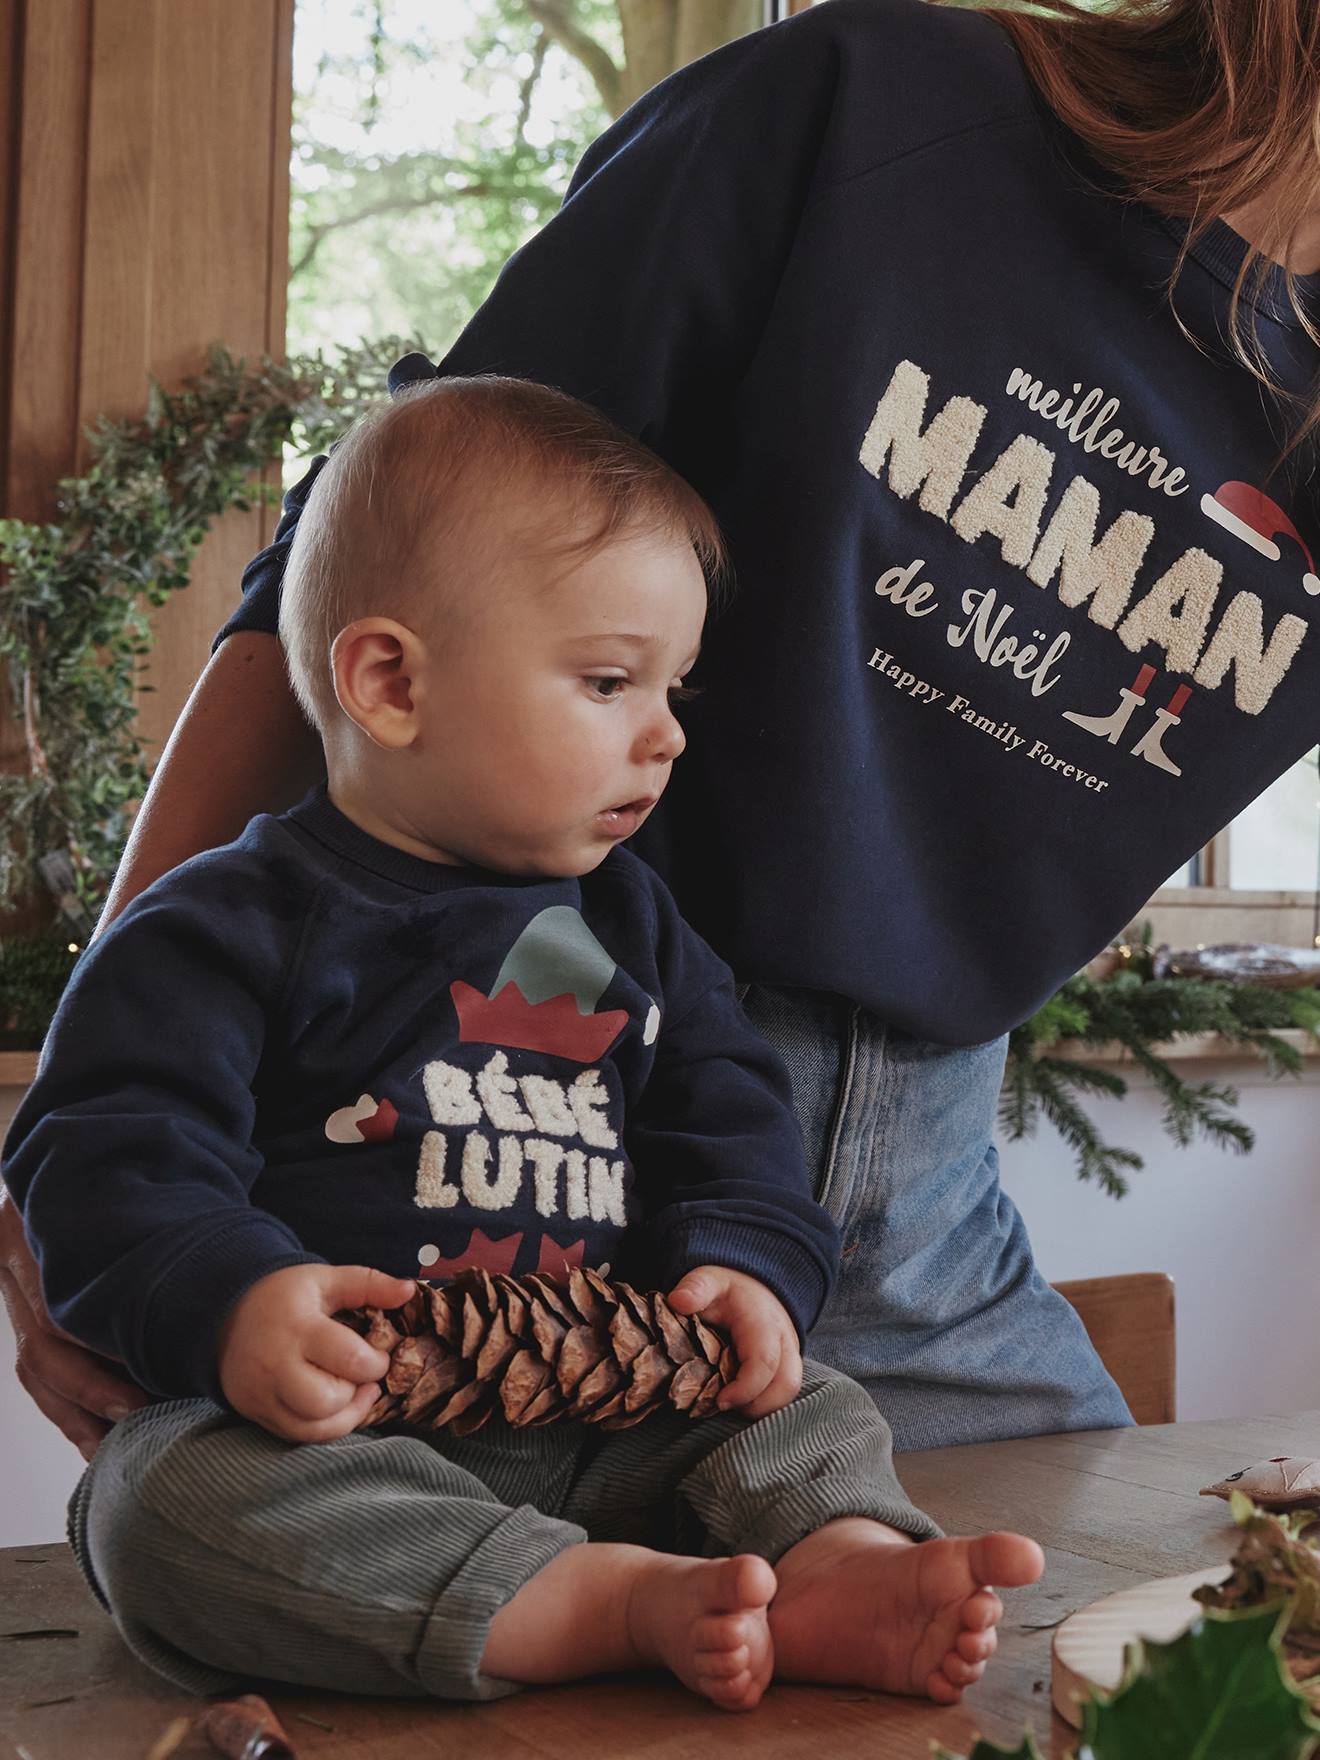 Christmas Special Sweatshirt, "Happy Family Forever" Capsule Collection, for Babies navy blue